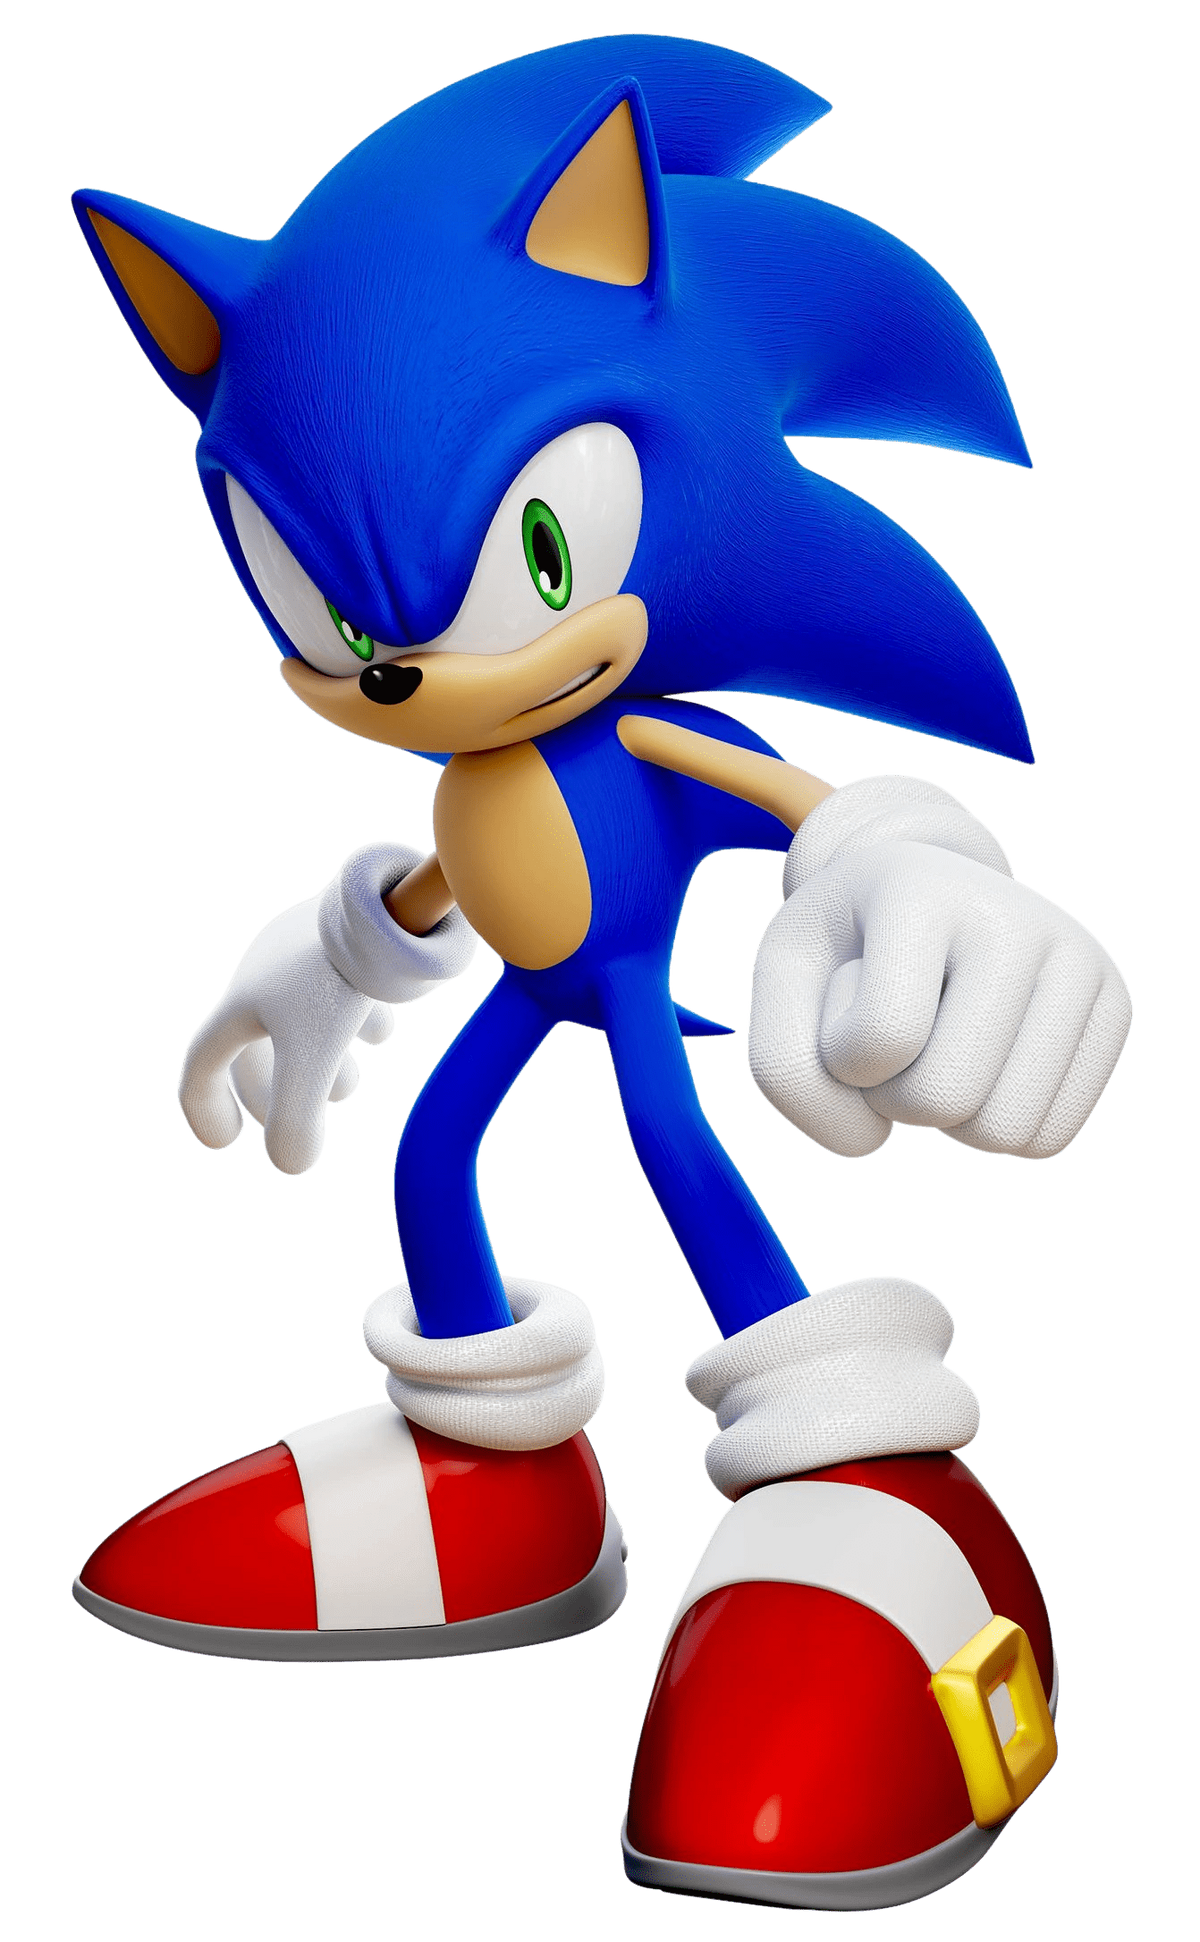 Sonic the Hedgehog The Best of Stage Music, Sonic Fanon Wiki